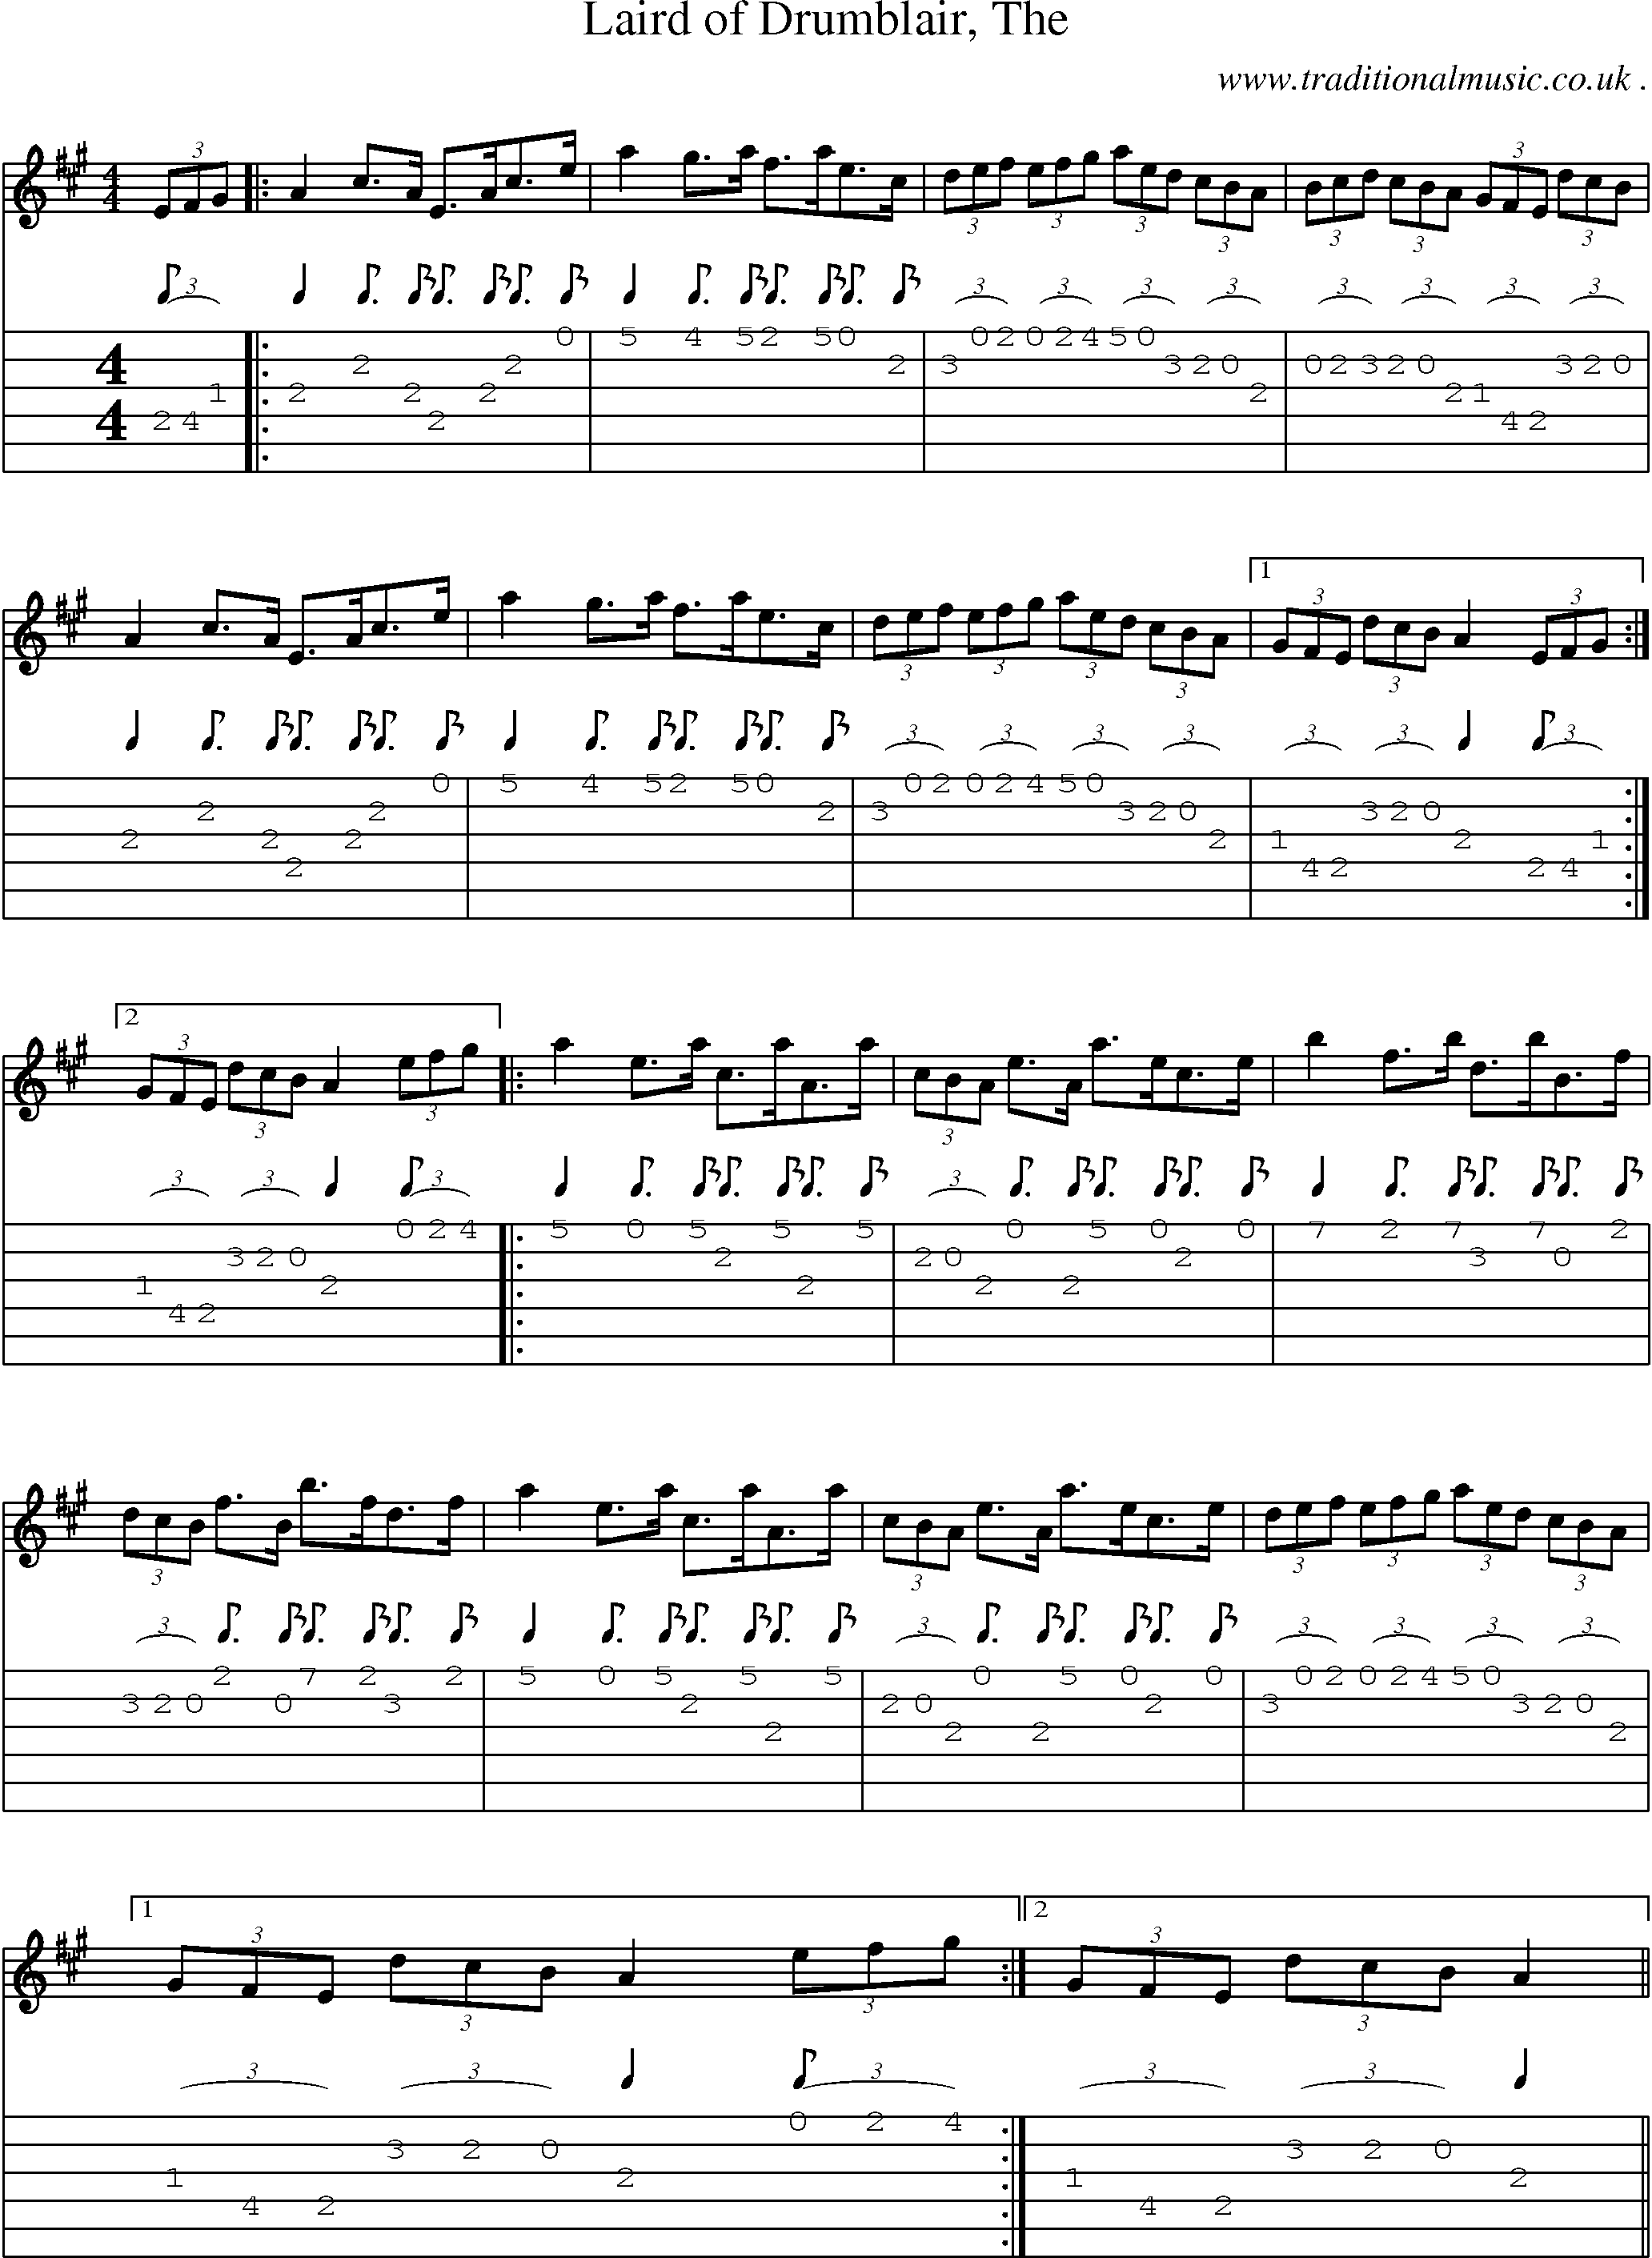 Sheet-music  score, Chords and Guitar Tabs for Laird Of Drumblair The